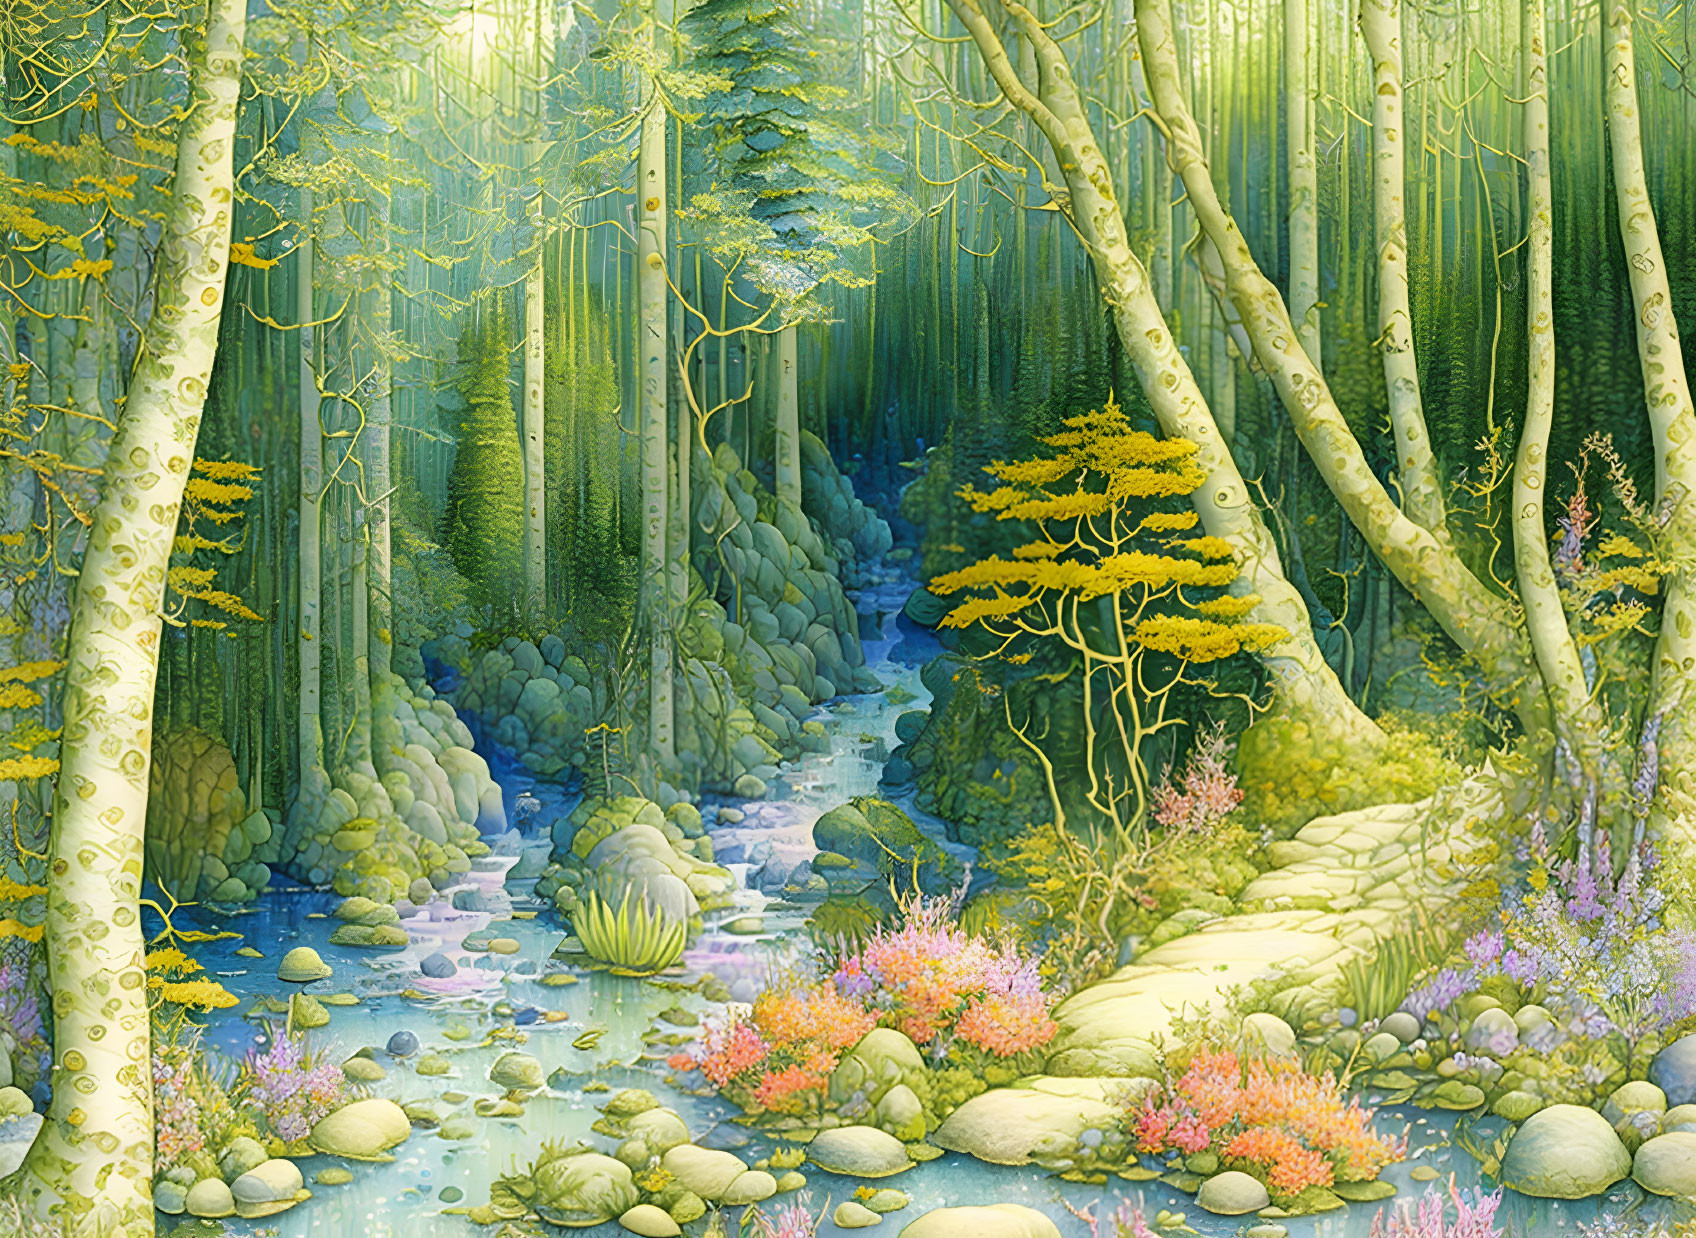 Detailed illustration of tranquil forest with bamboo, colorful flora, stream, and golden sunlight